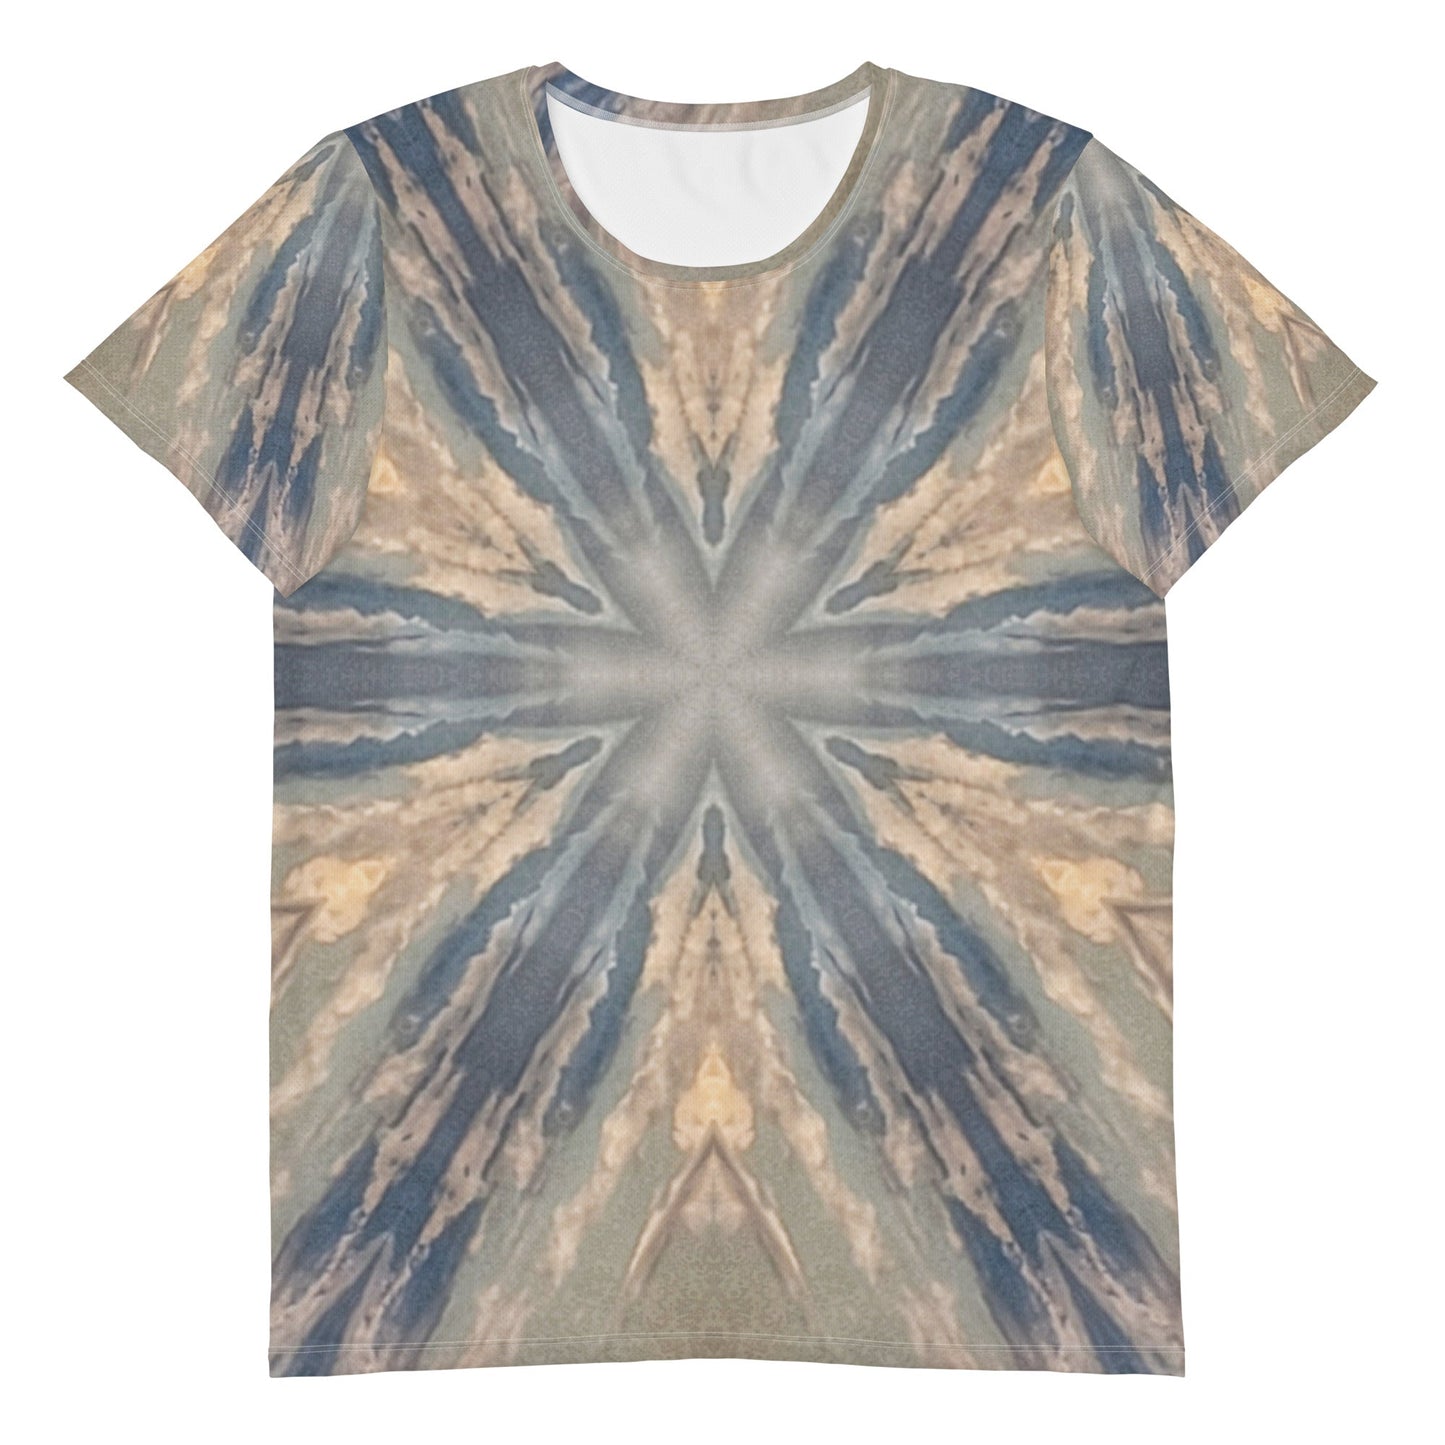 Copy of All-Over Print Men's Athletic T-shirt